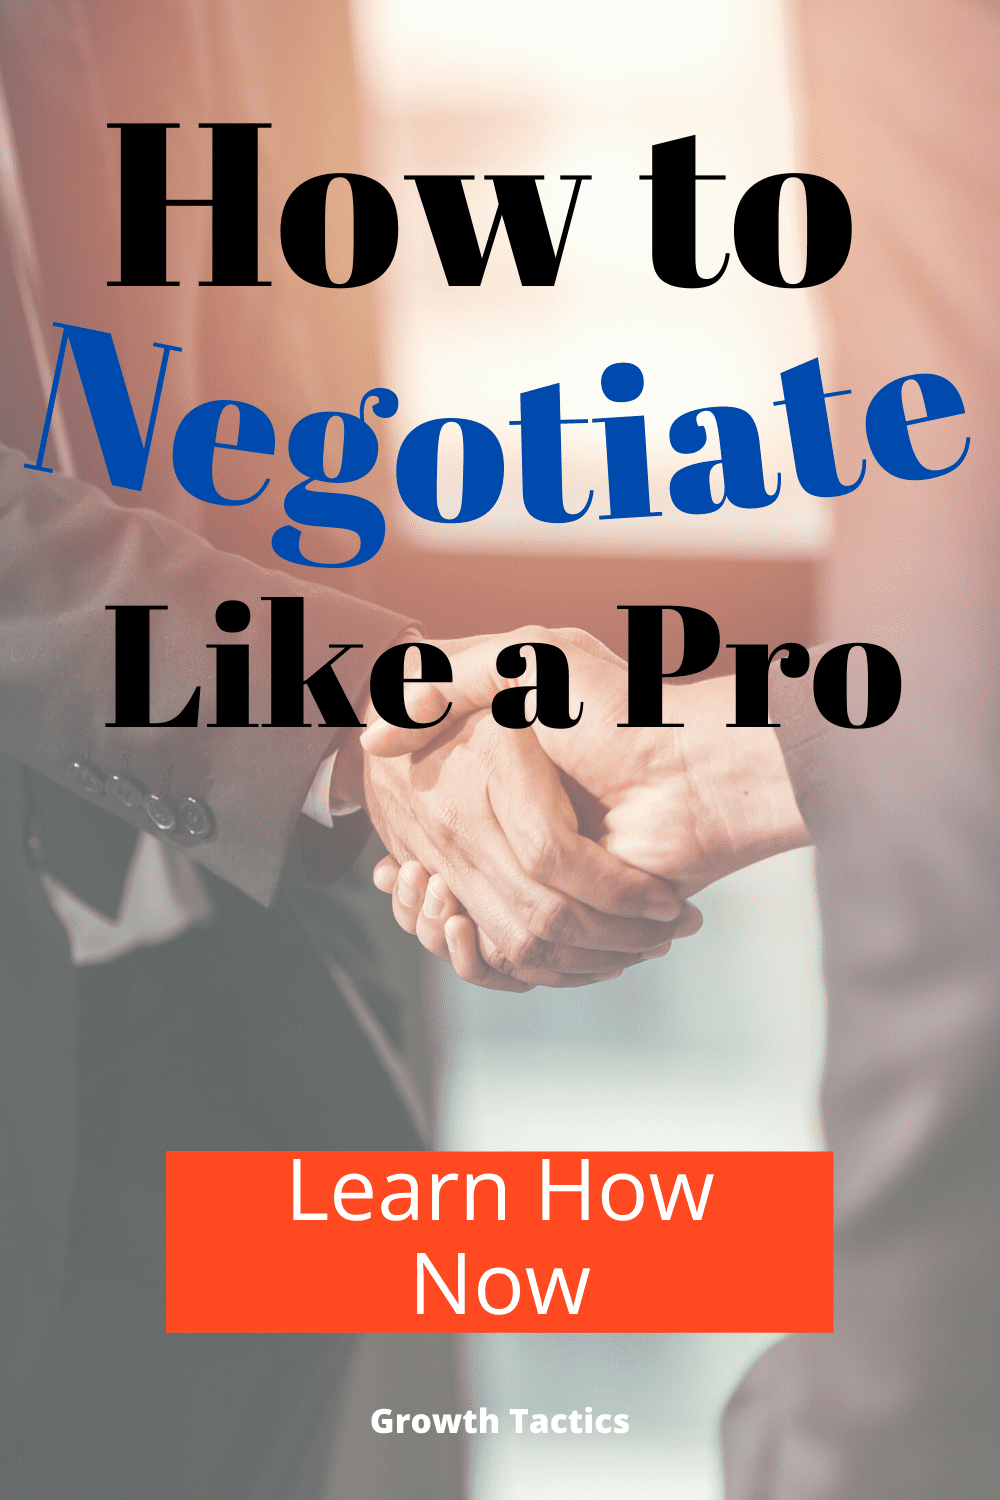 11 Tips to Negotiate Like a Pro: How to Close the Deal